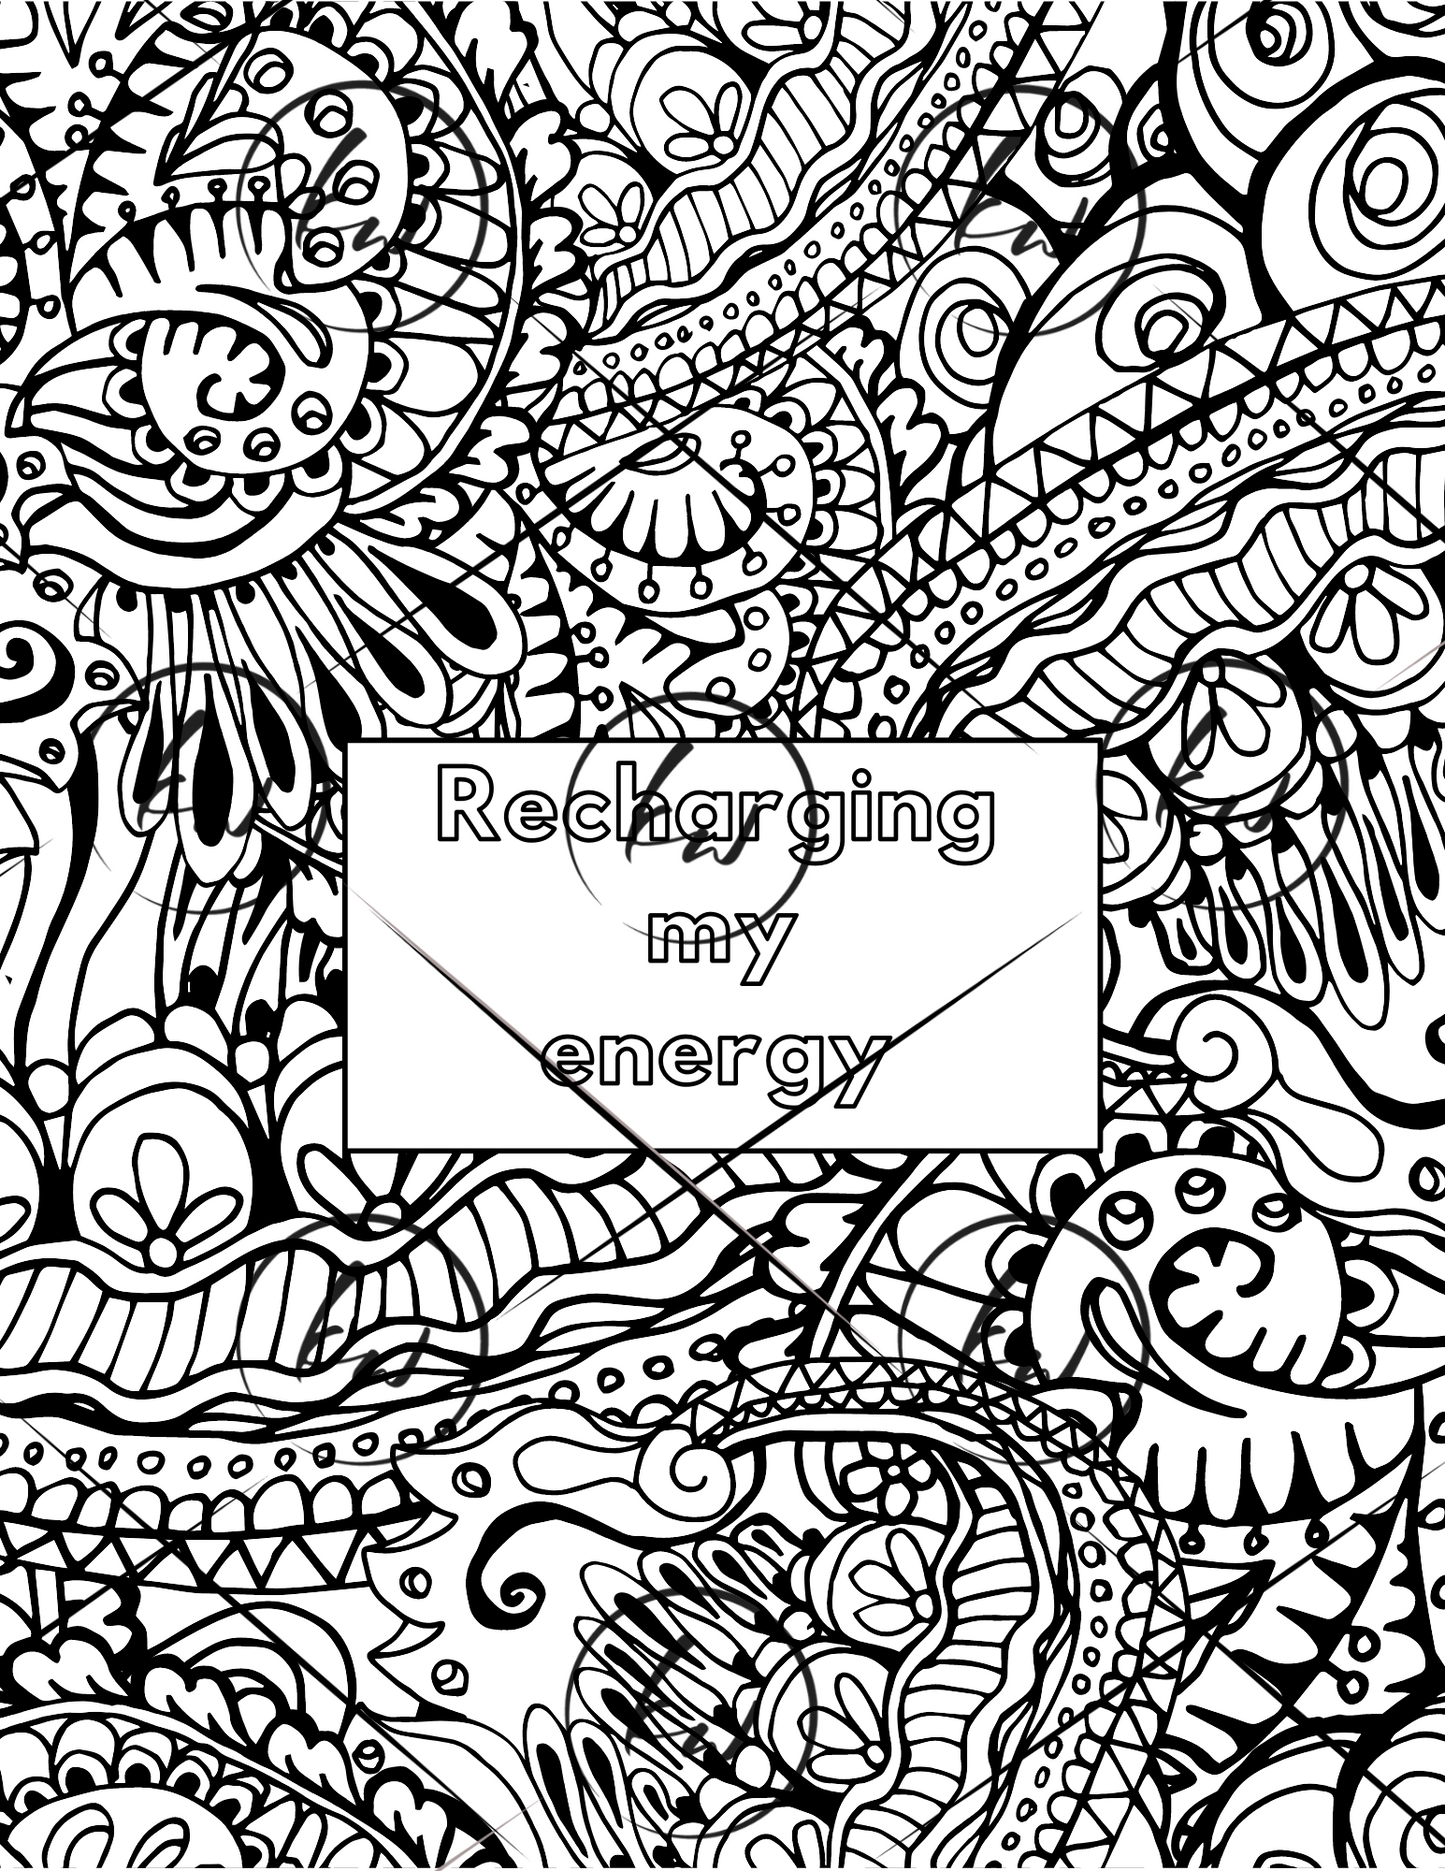 Empowered Coloring Book